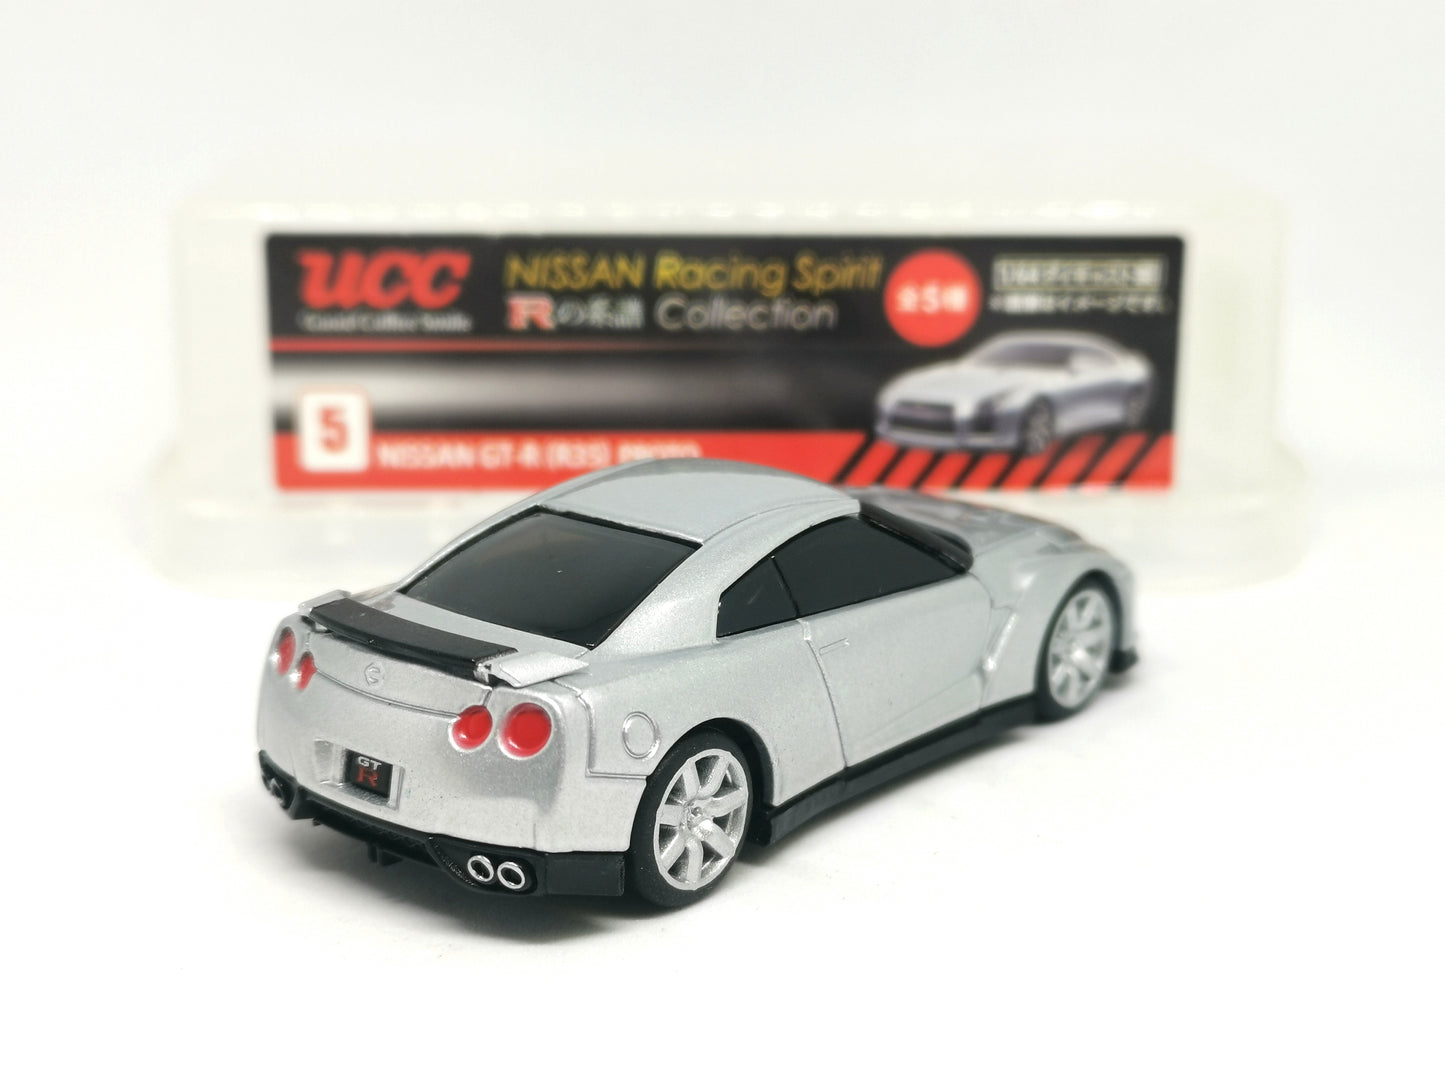 ucc Coffee Nissan Racing Spirit Collection #5 Nissan GT-R(R35) Proto Scale 1:64